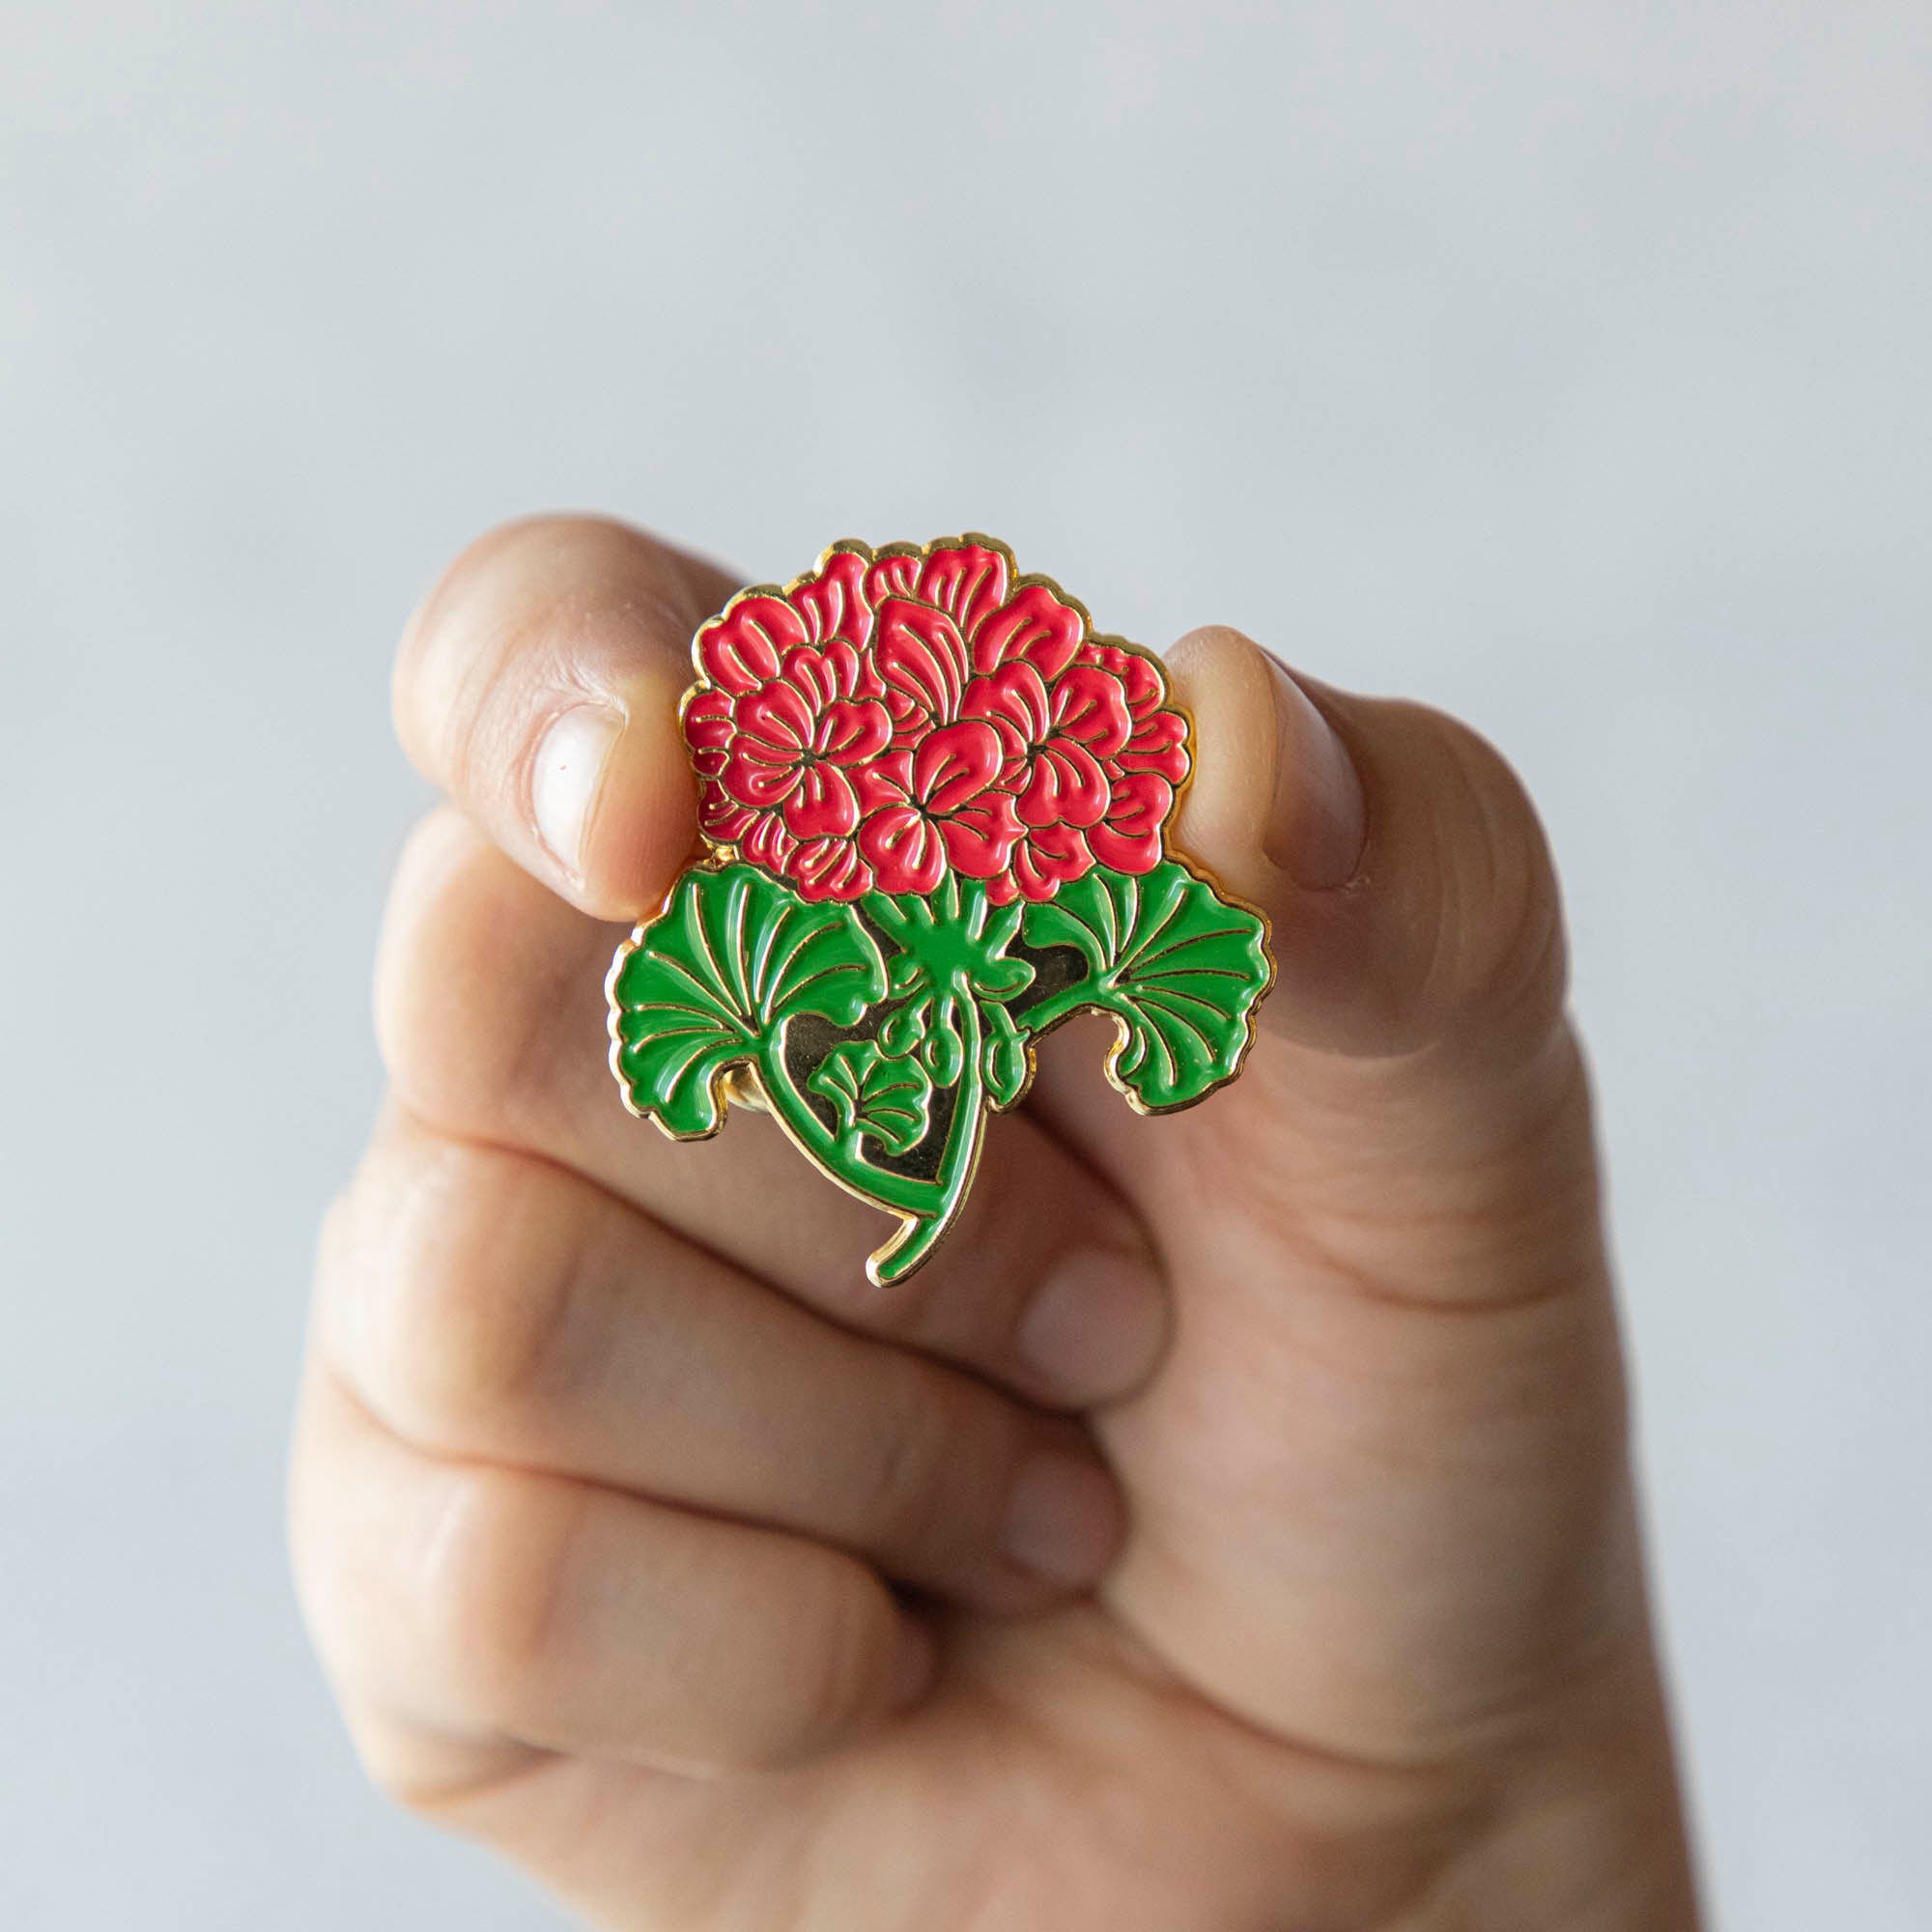 A person proudly displaying a Hester &amp; Cook Geranium Enamel Pin with a vibrant red chrysanthemum flower.